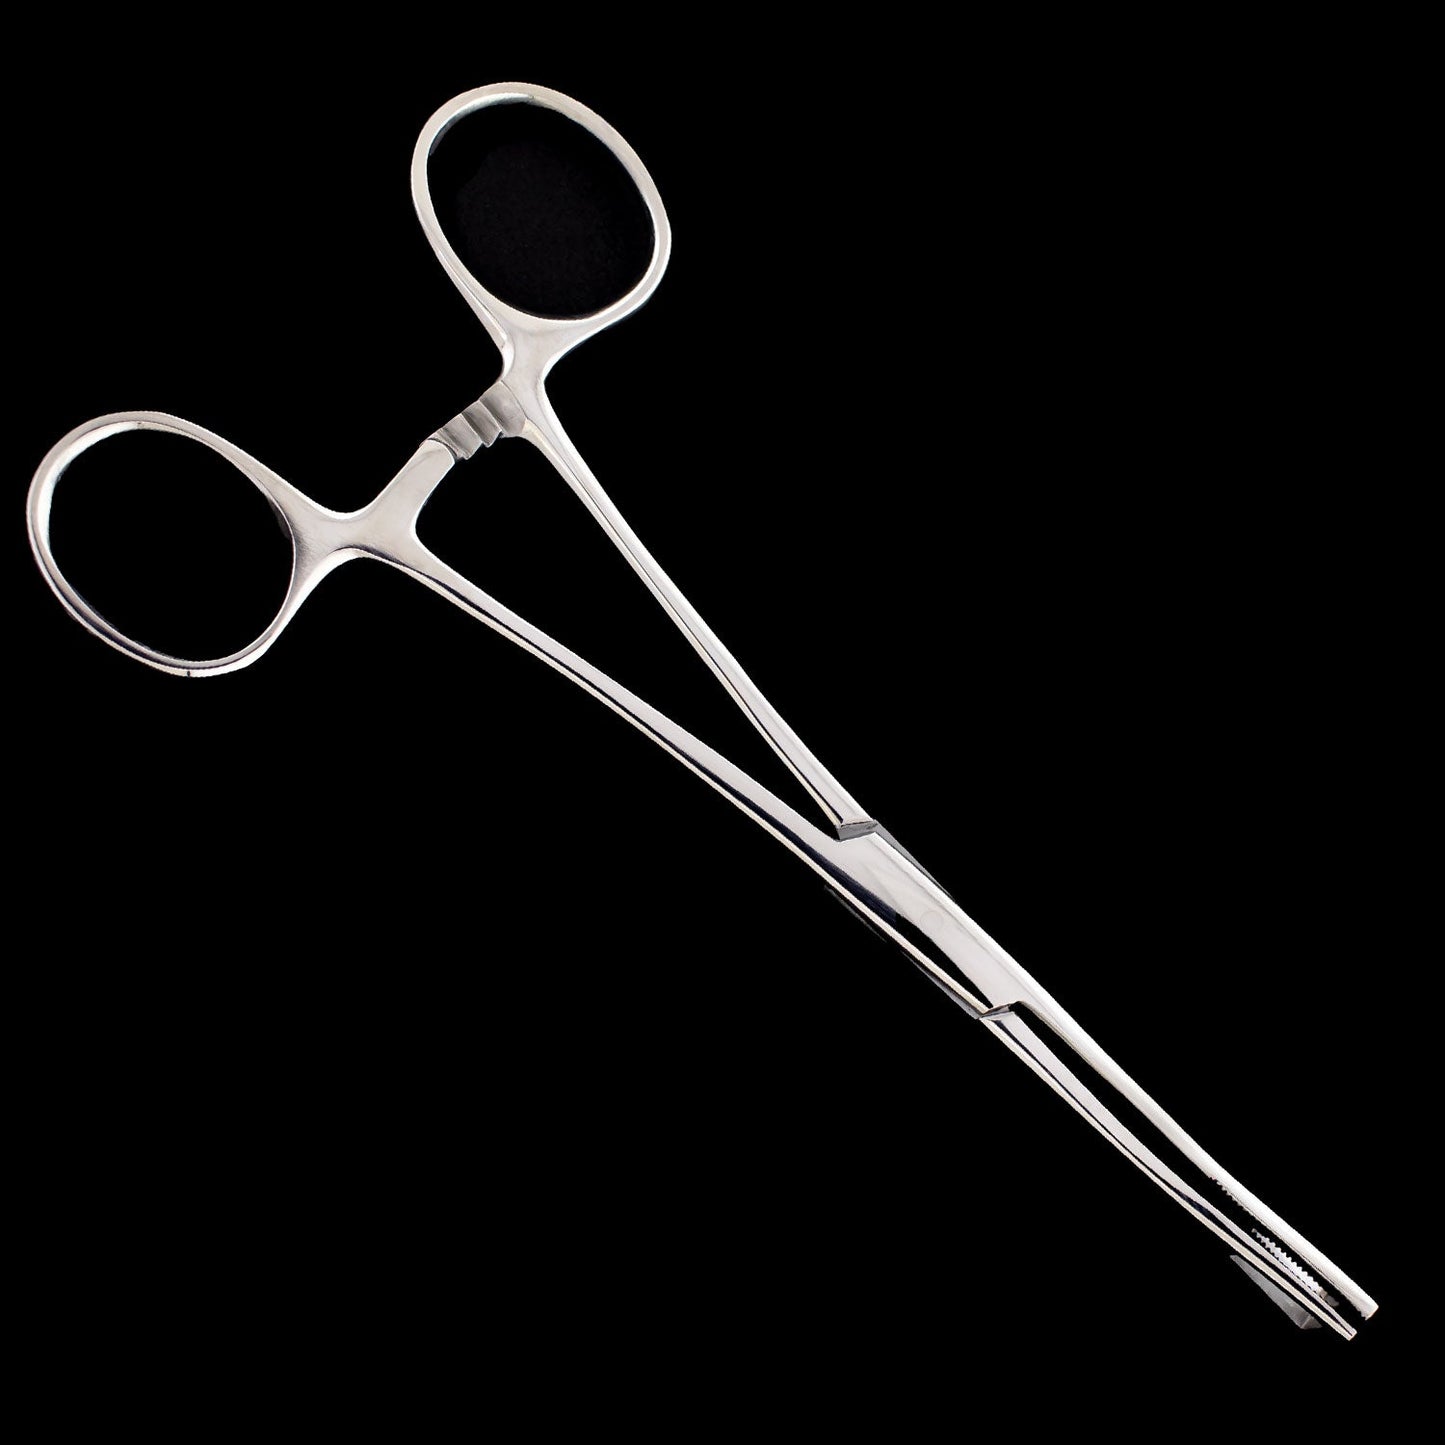 Non-Slotted Pennington Forceps With Ratchet